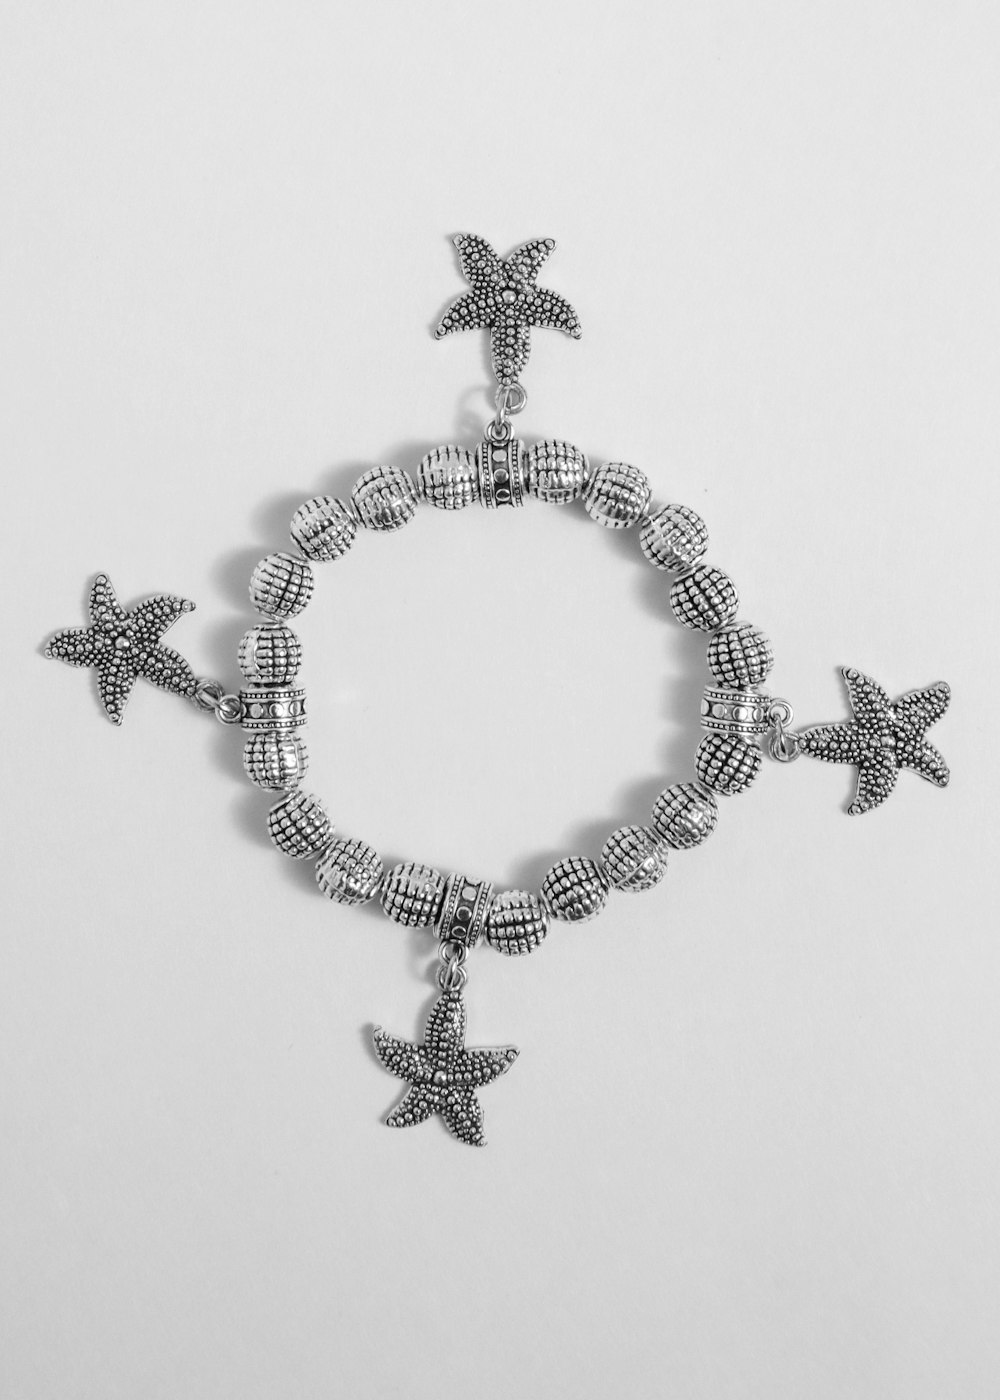 a bracelet with a starfish charm on it